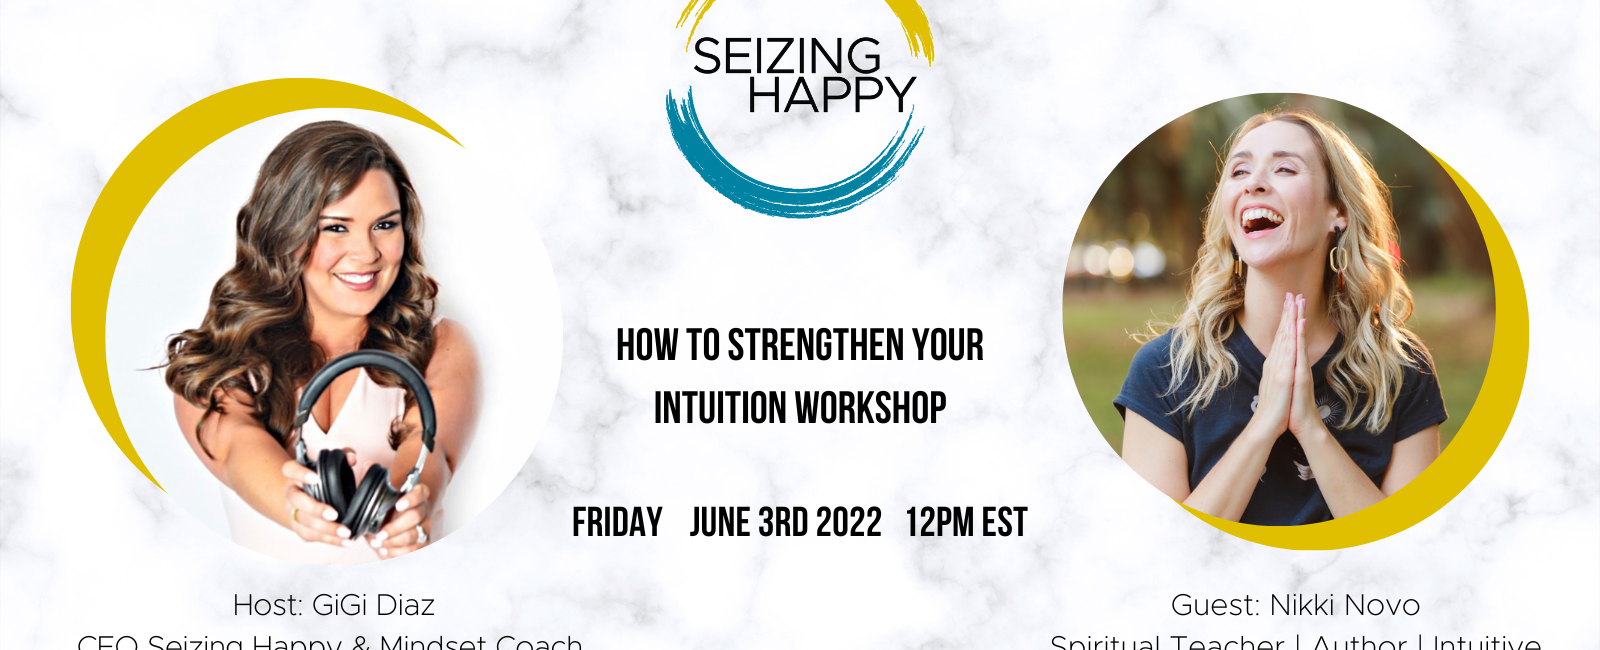 How to Strengthen Your Intuition Workshop Feat Nikki Novo